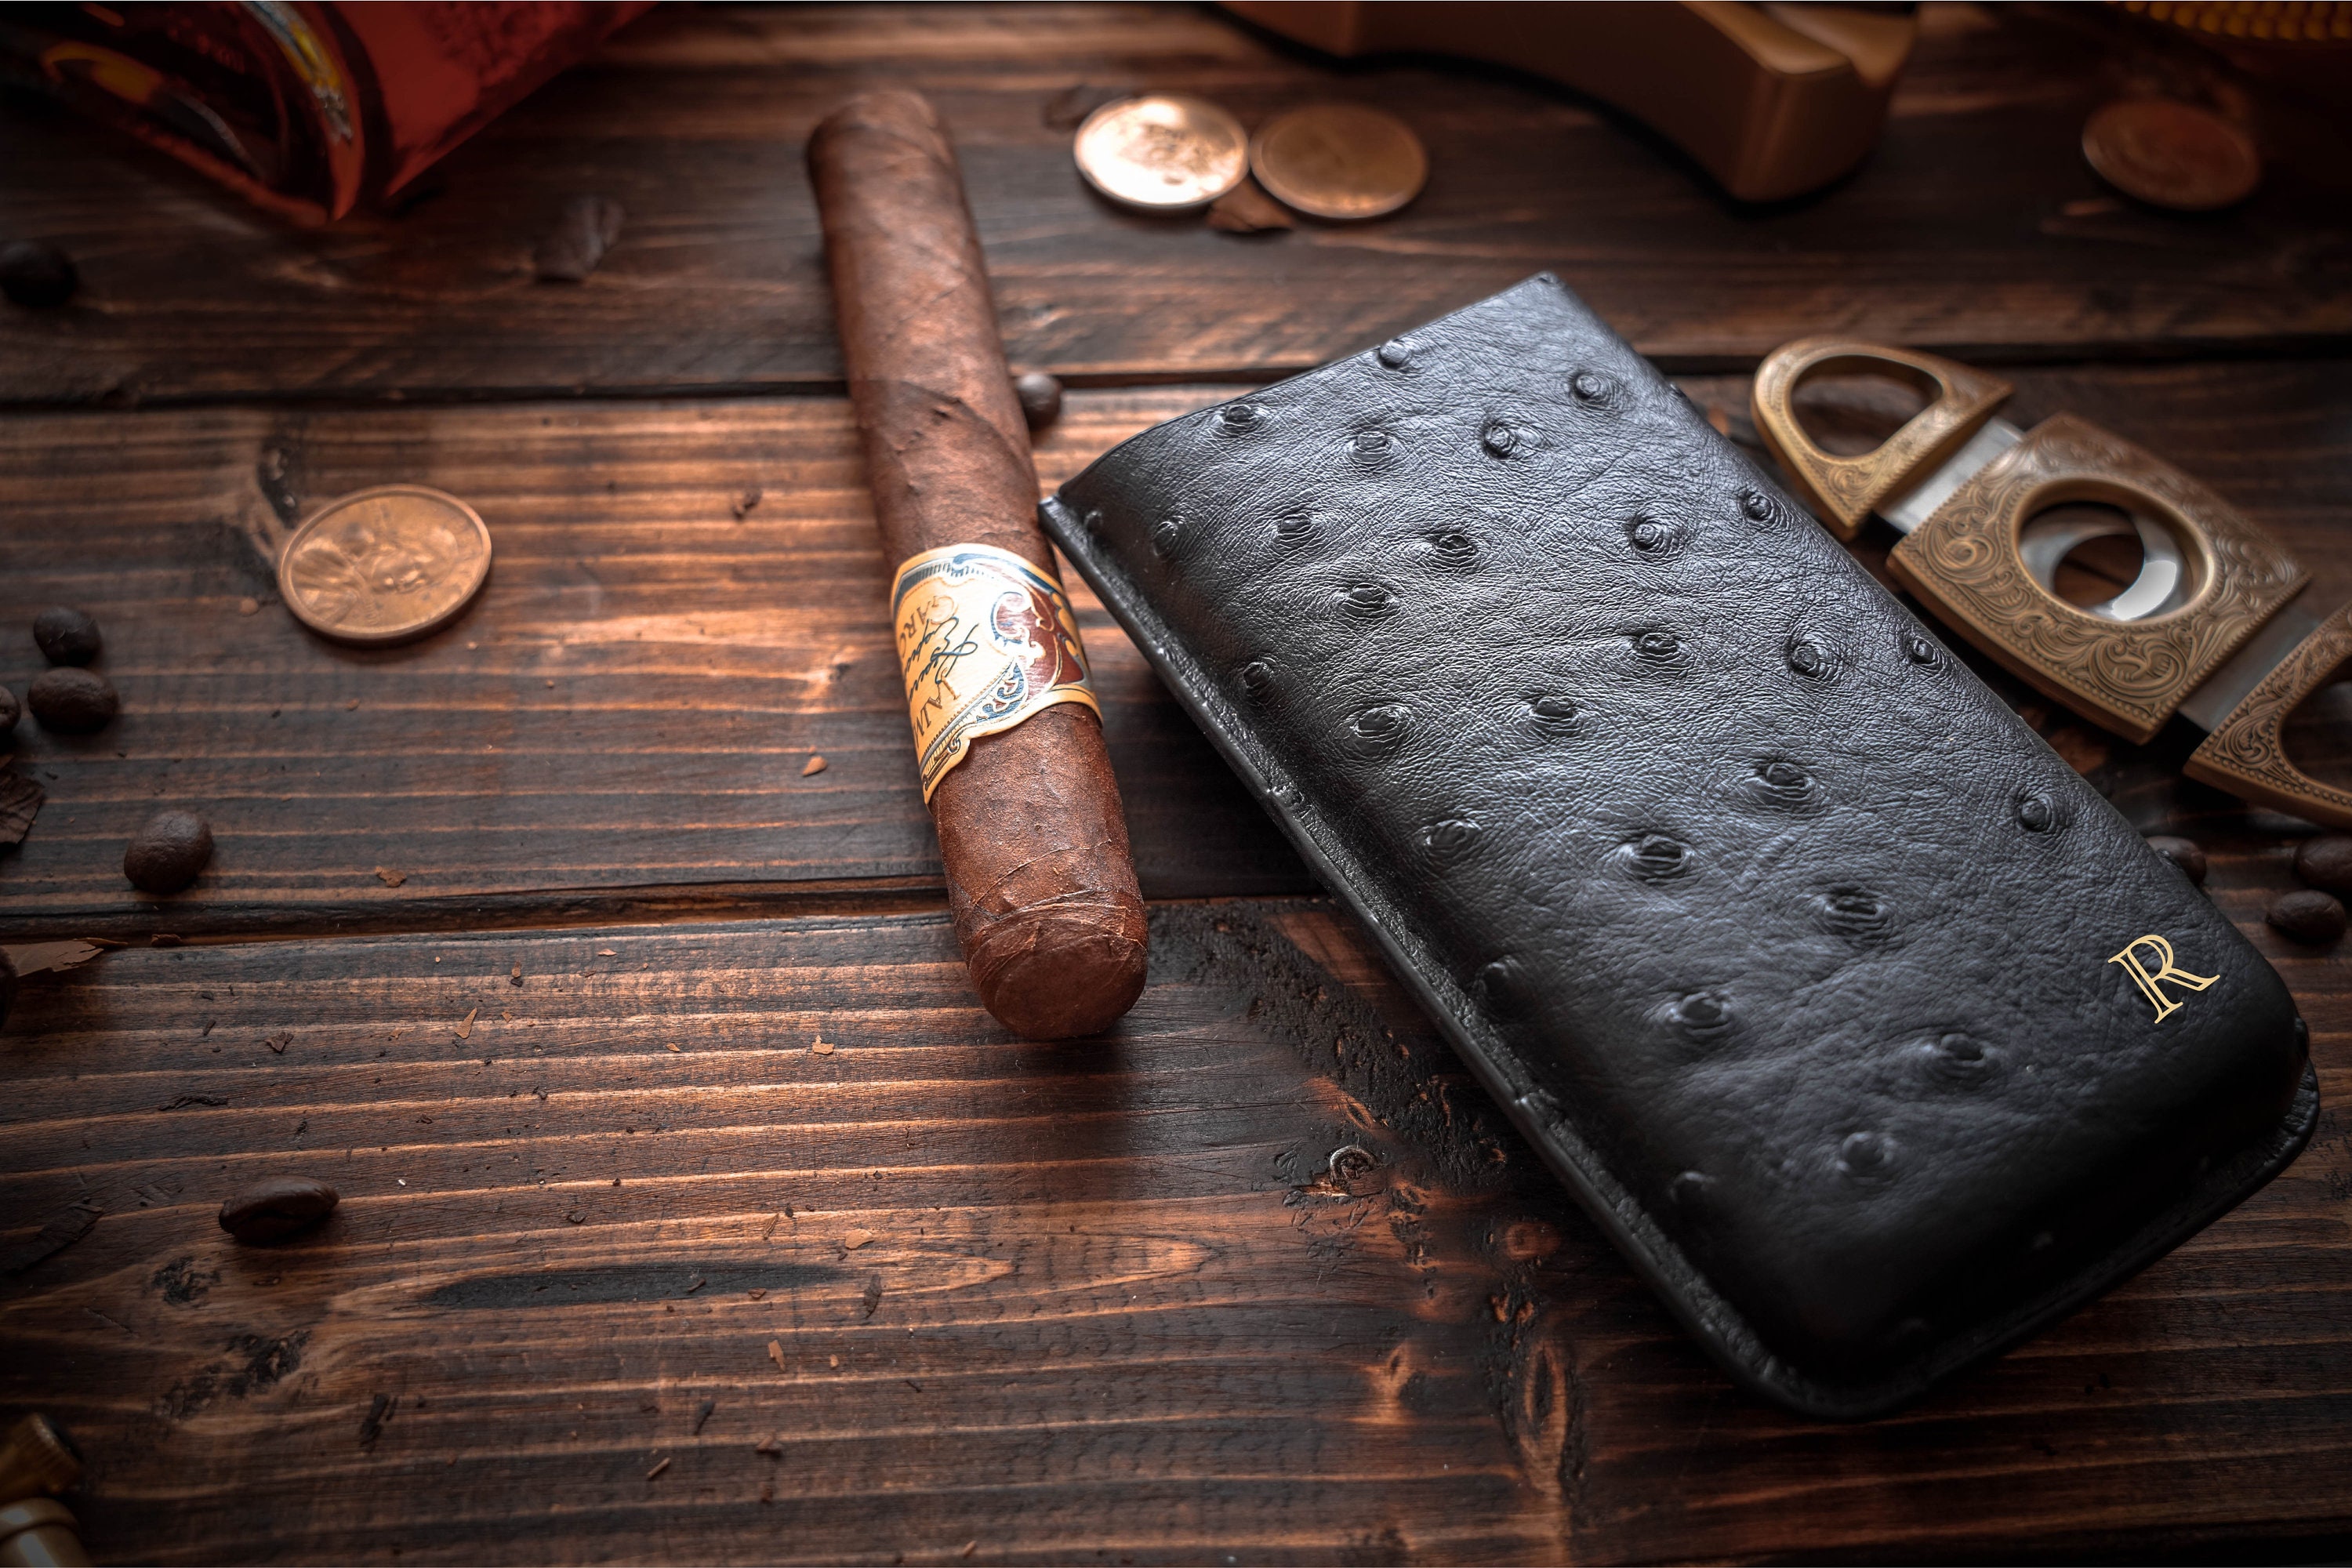 Luxury Cigar Case Personalized Gift Christmas Gift for Men -  Norway